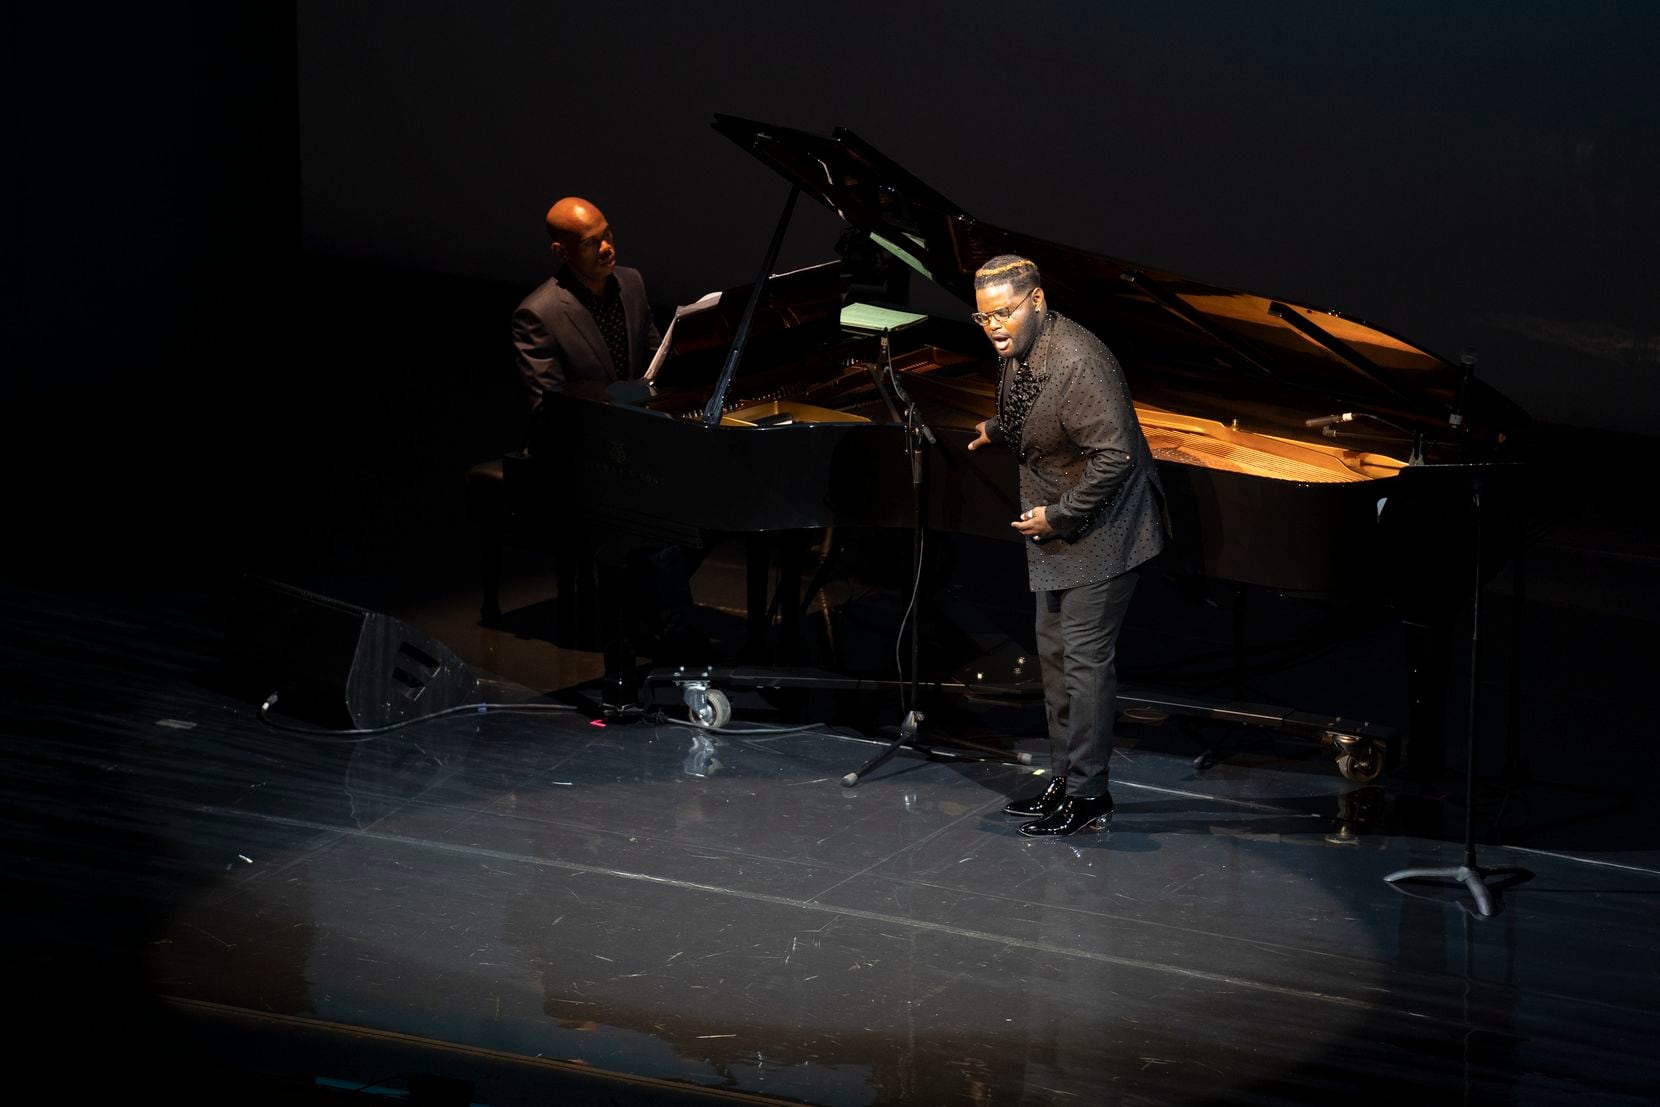 John Holiday performs at the Dallas Opera in the group's first in-person concert since the...